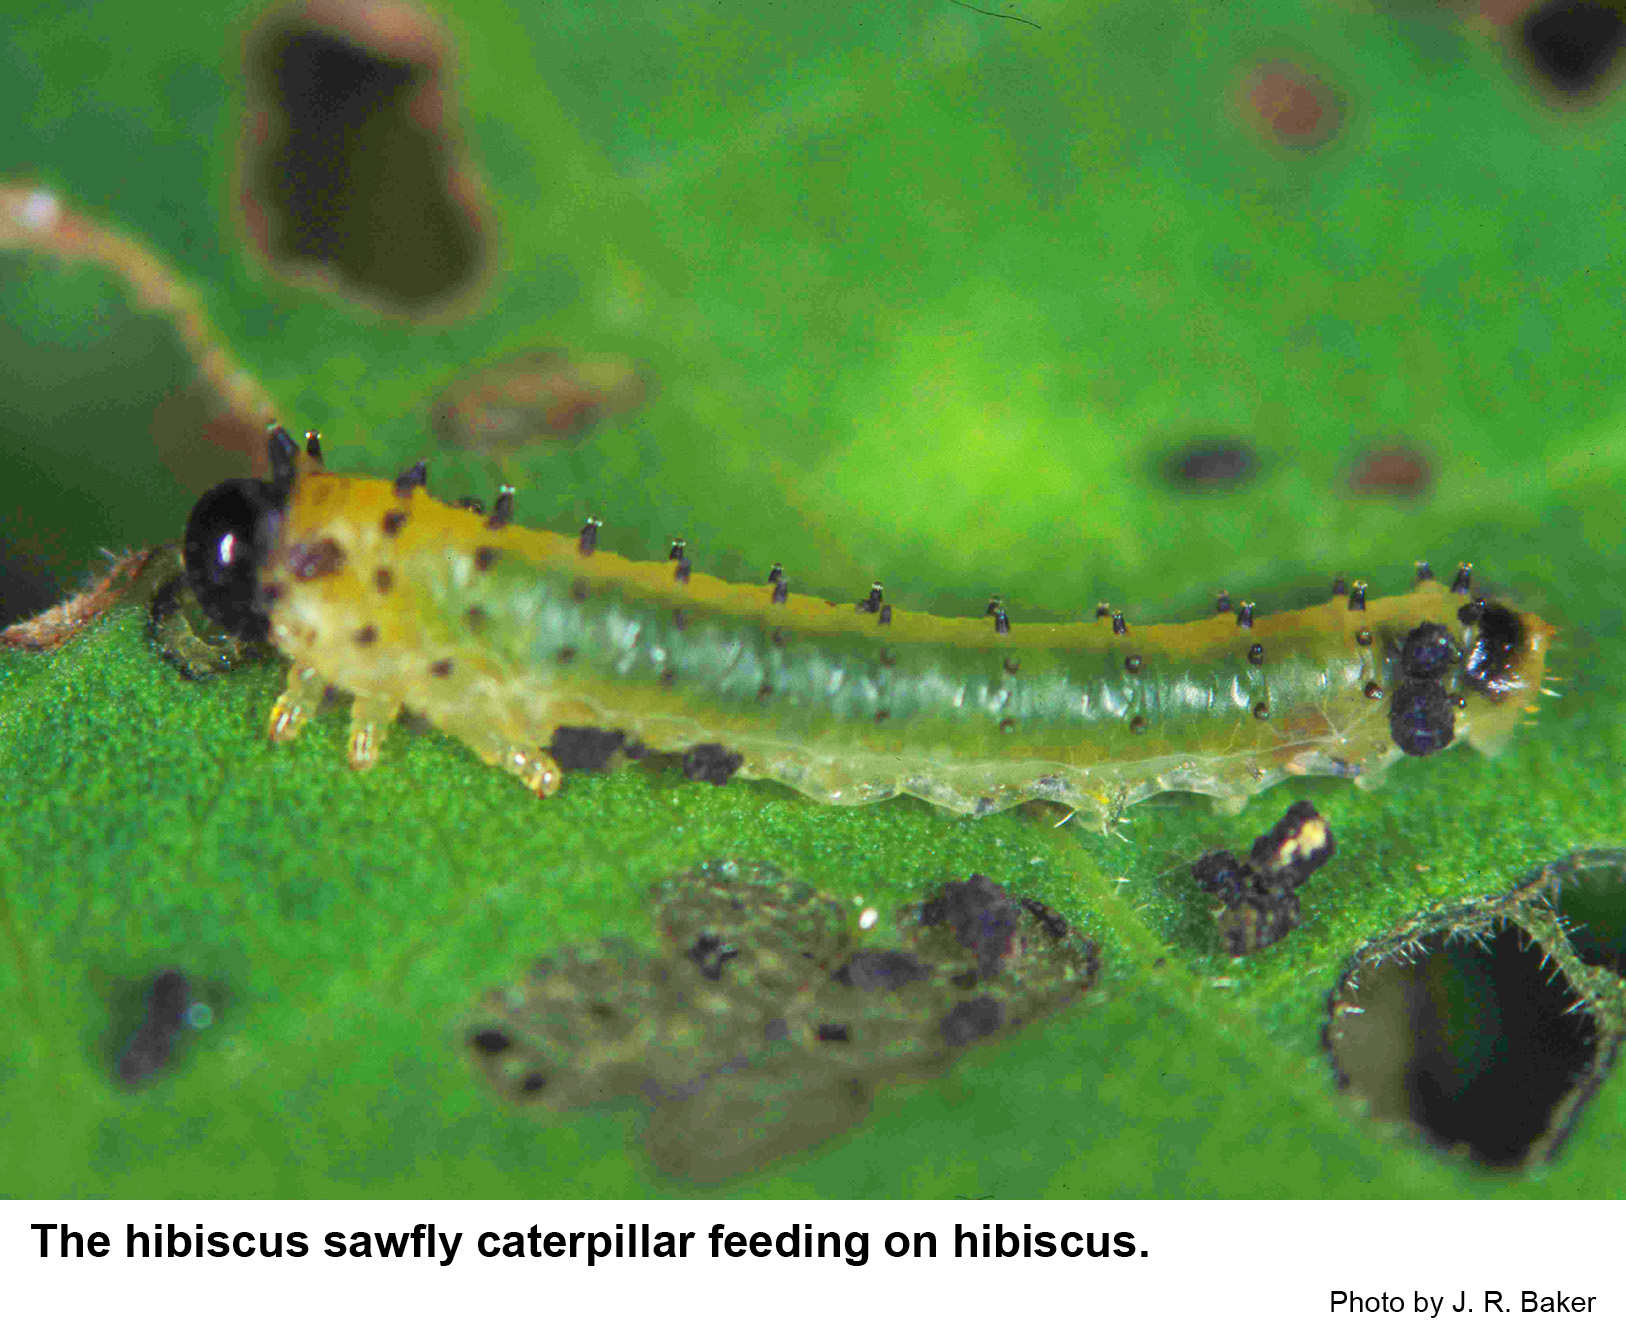 Older hibiscus sawfly caterpillars chew holes in mallow leaves.